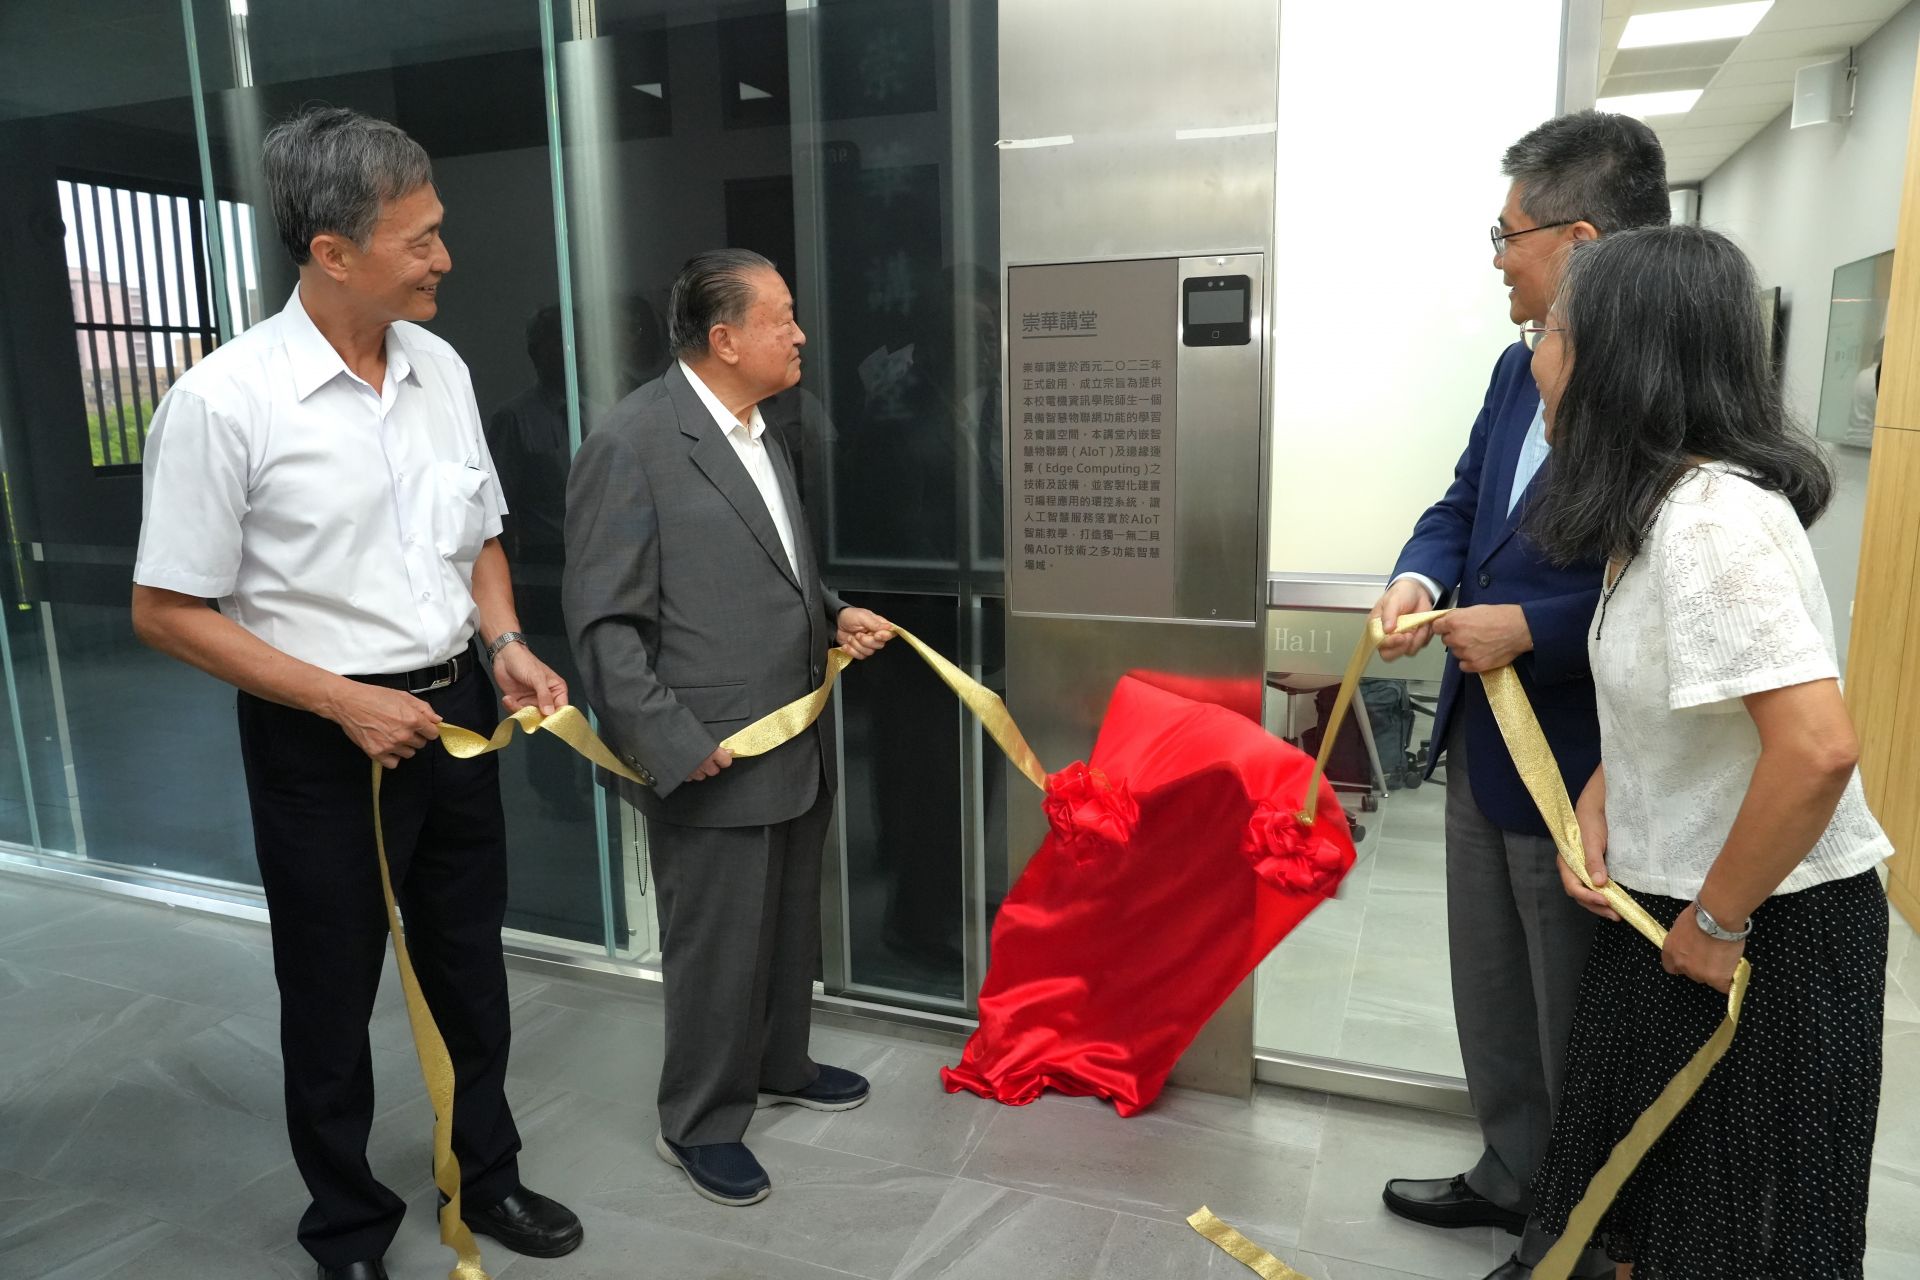 EECS College Unveils 'Chong Hwa Lecture Hall' Spotlighting AIoT, Extending Thanks to Delta Electronics' Bruce Cheng for Support